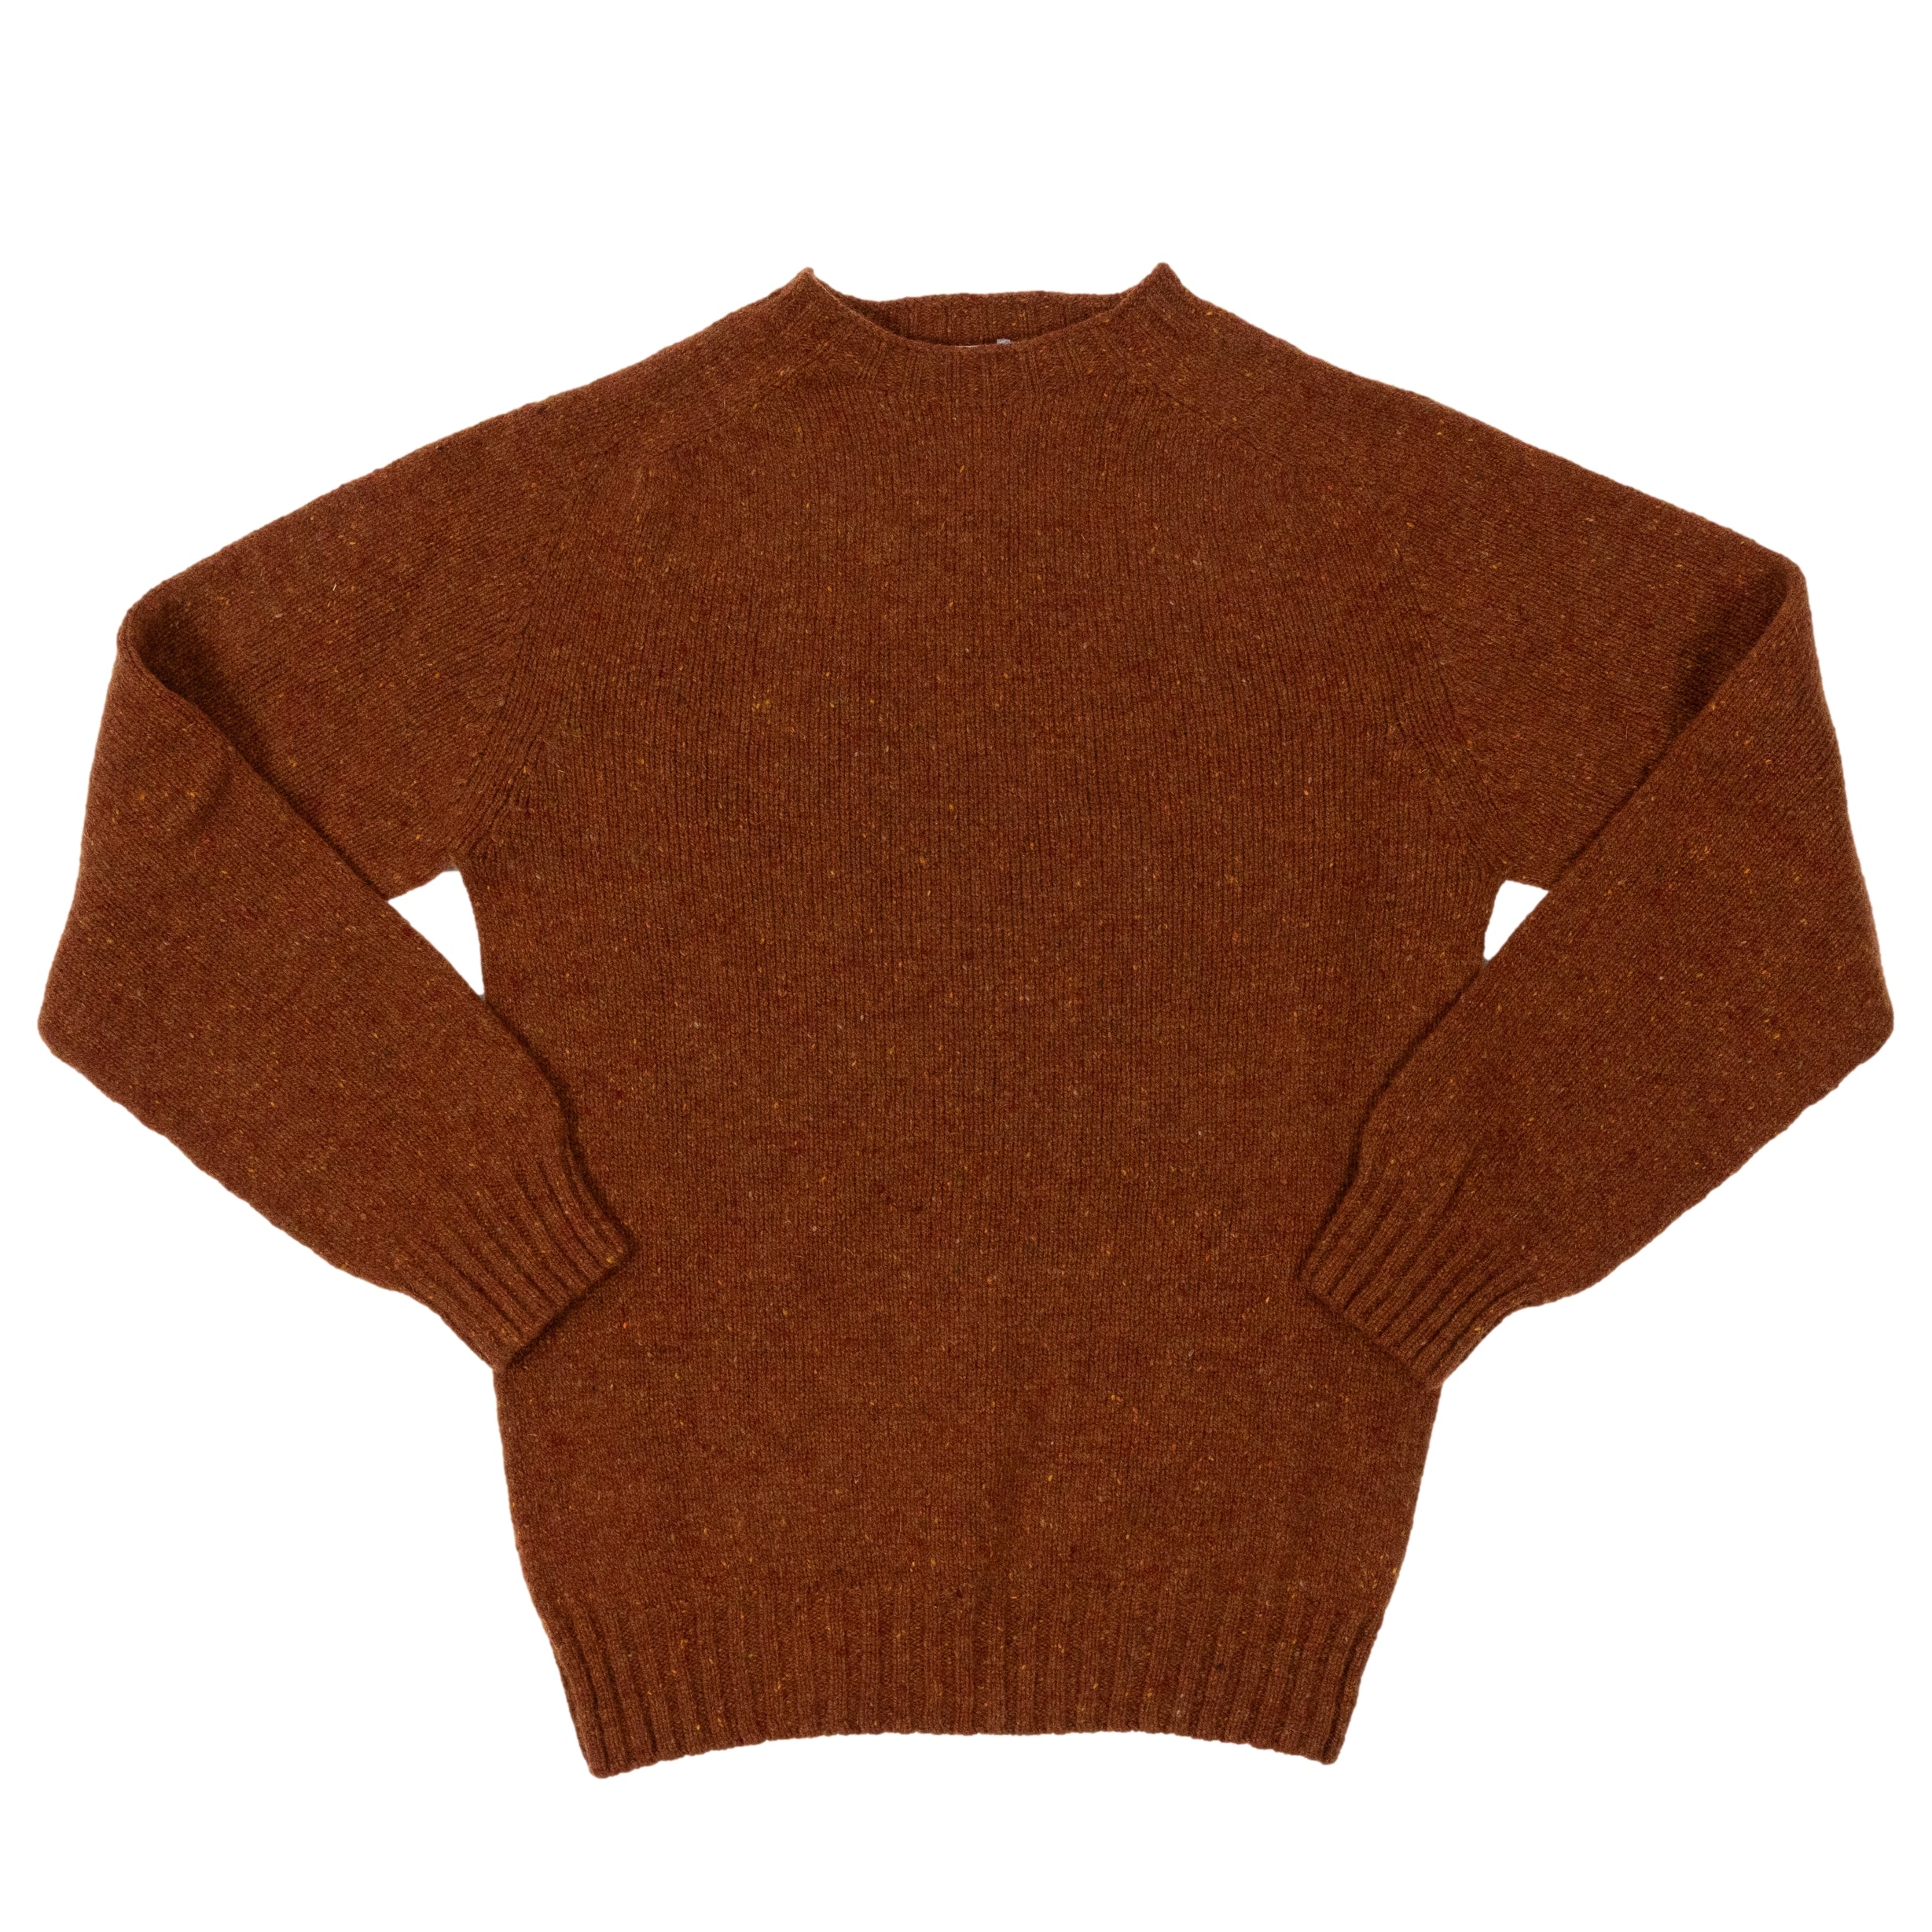 100% Wool Donegal Crew Neck Sweater